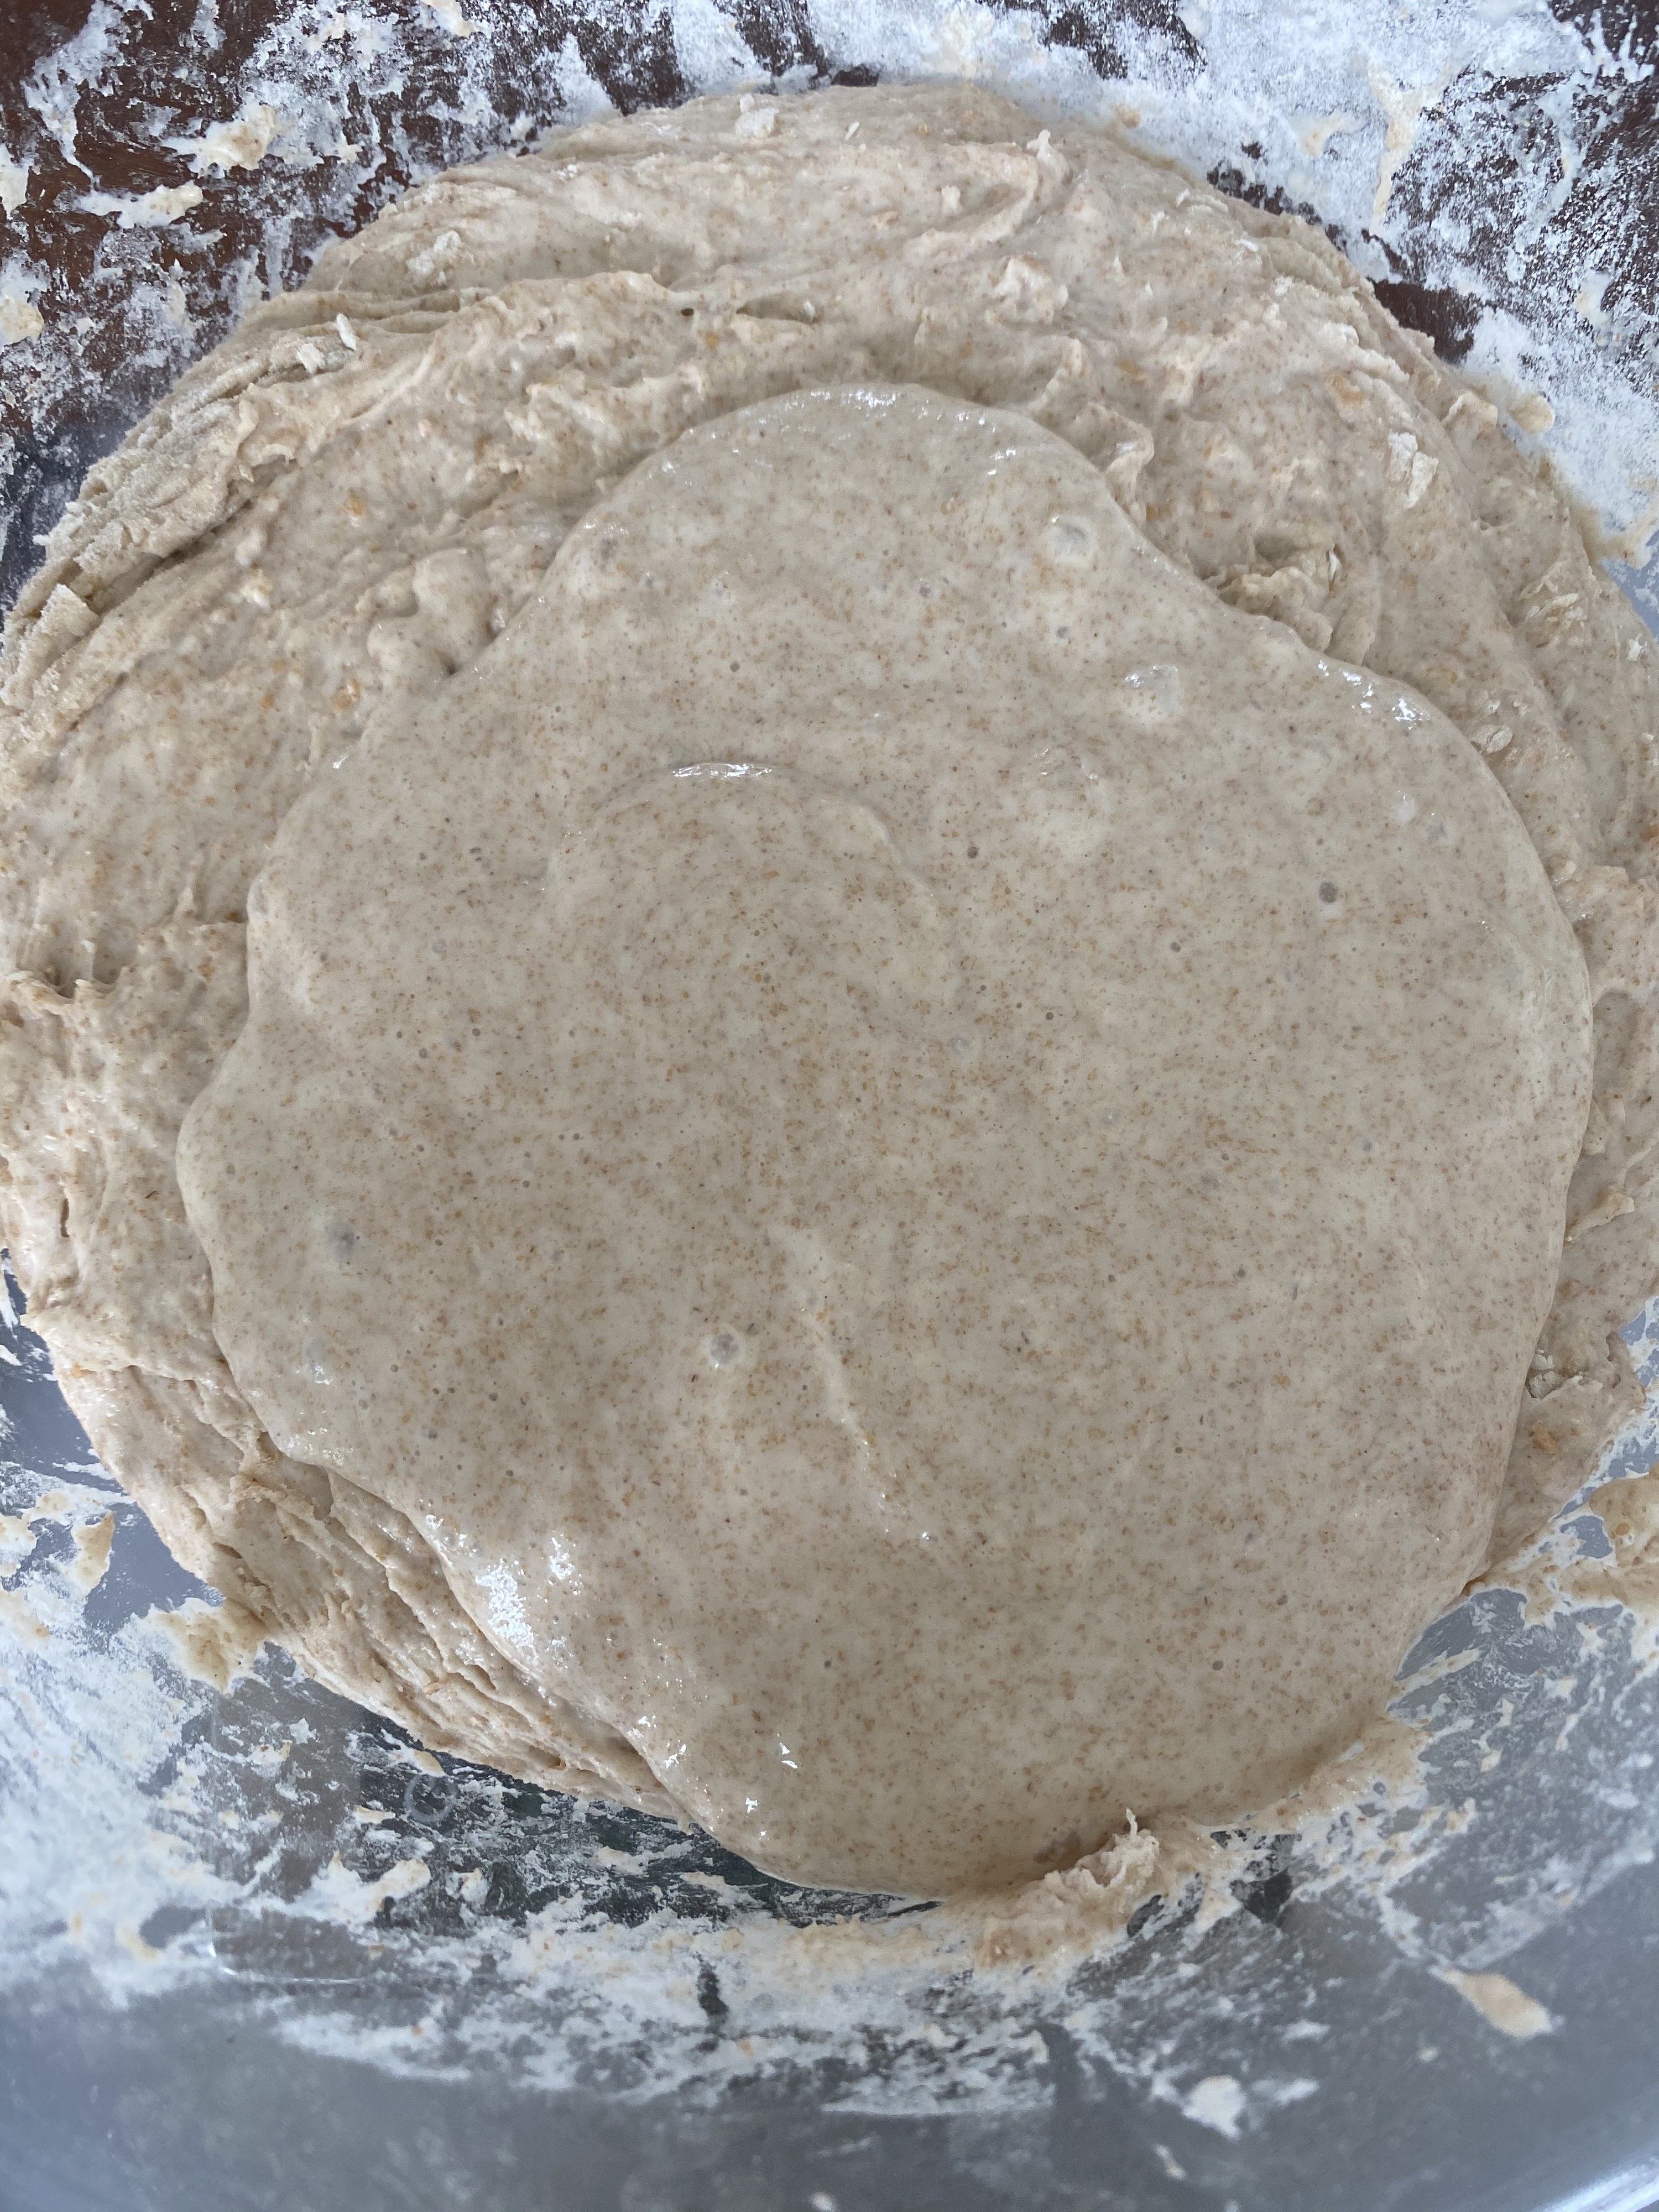 A bowl containing a portion of sourdough starter and the autolyse (flour and water mixture).